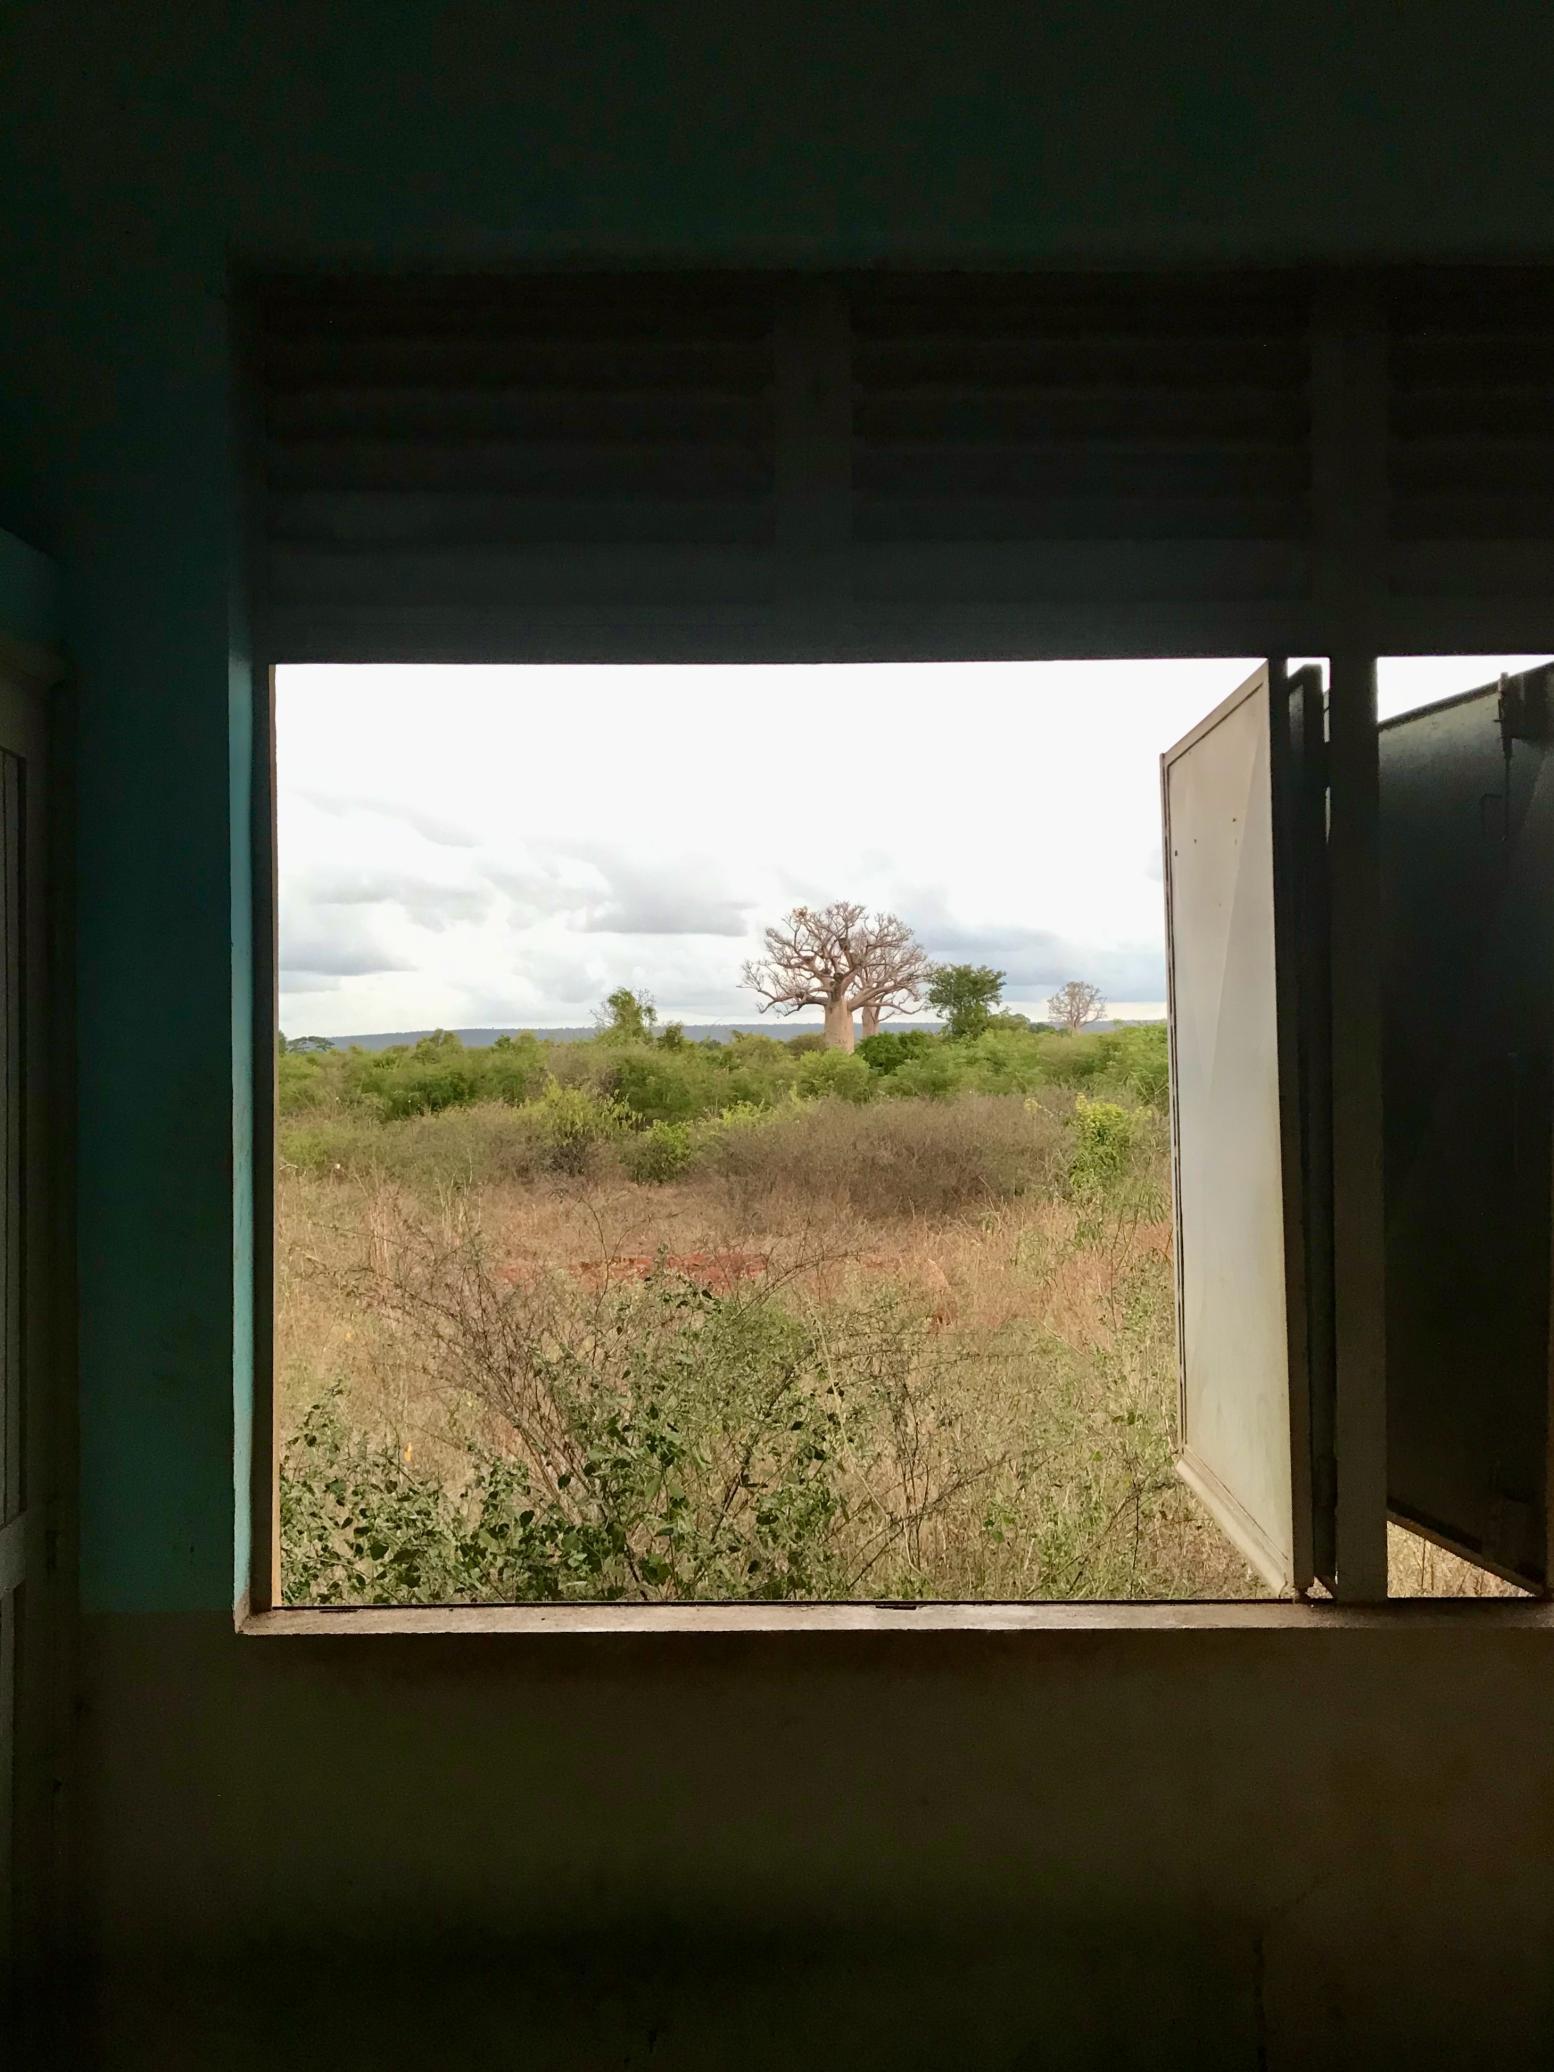 Nicole Rowley: View of the savanna from the school house in Ankatepoke, Madagascar